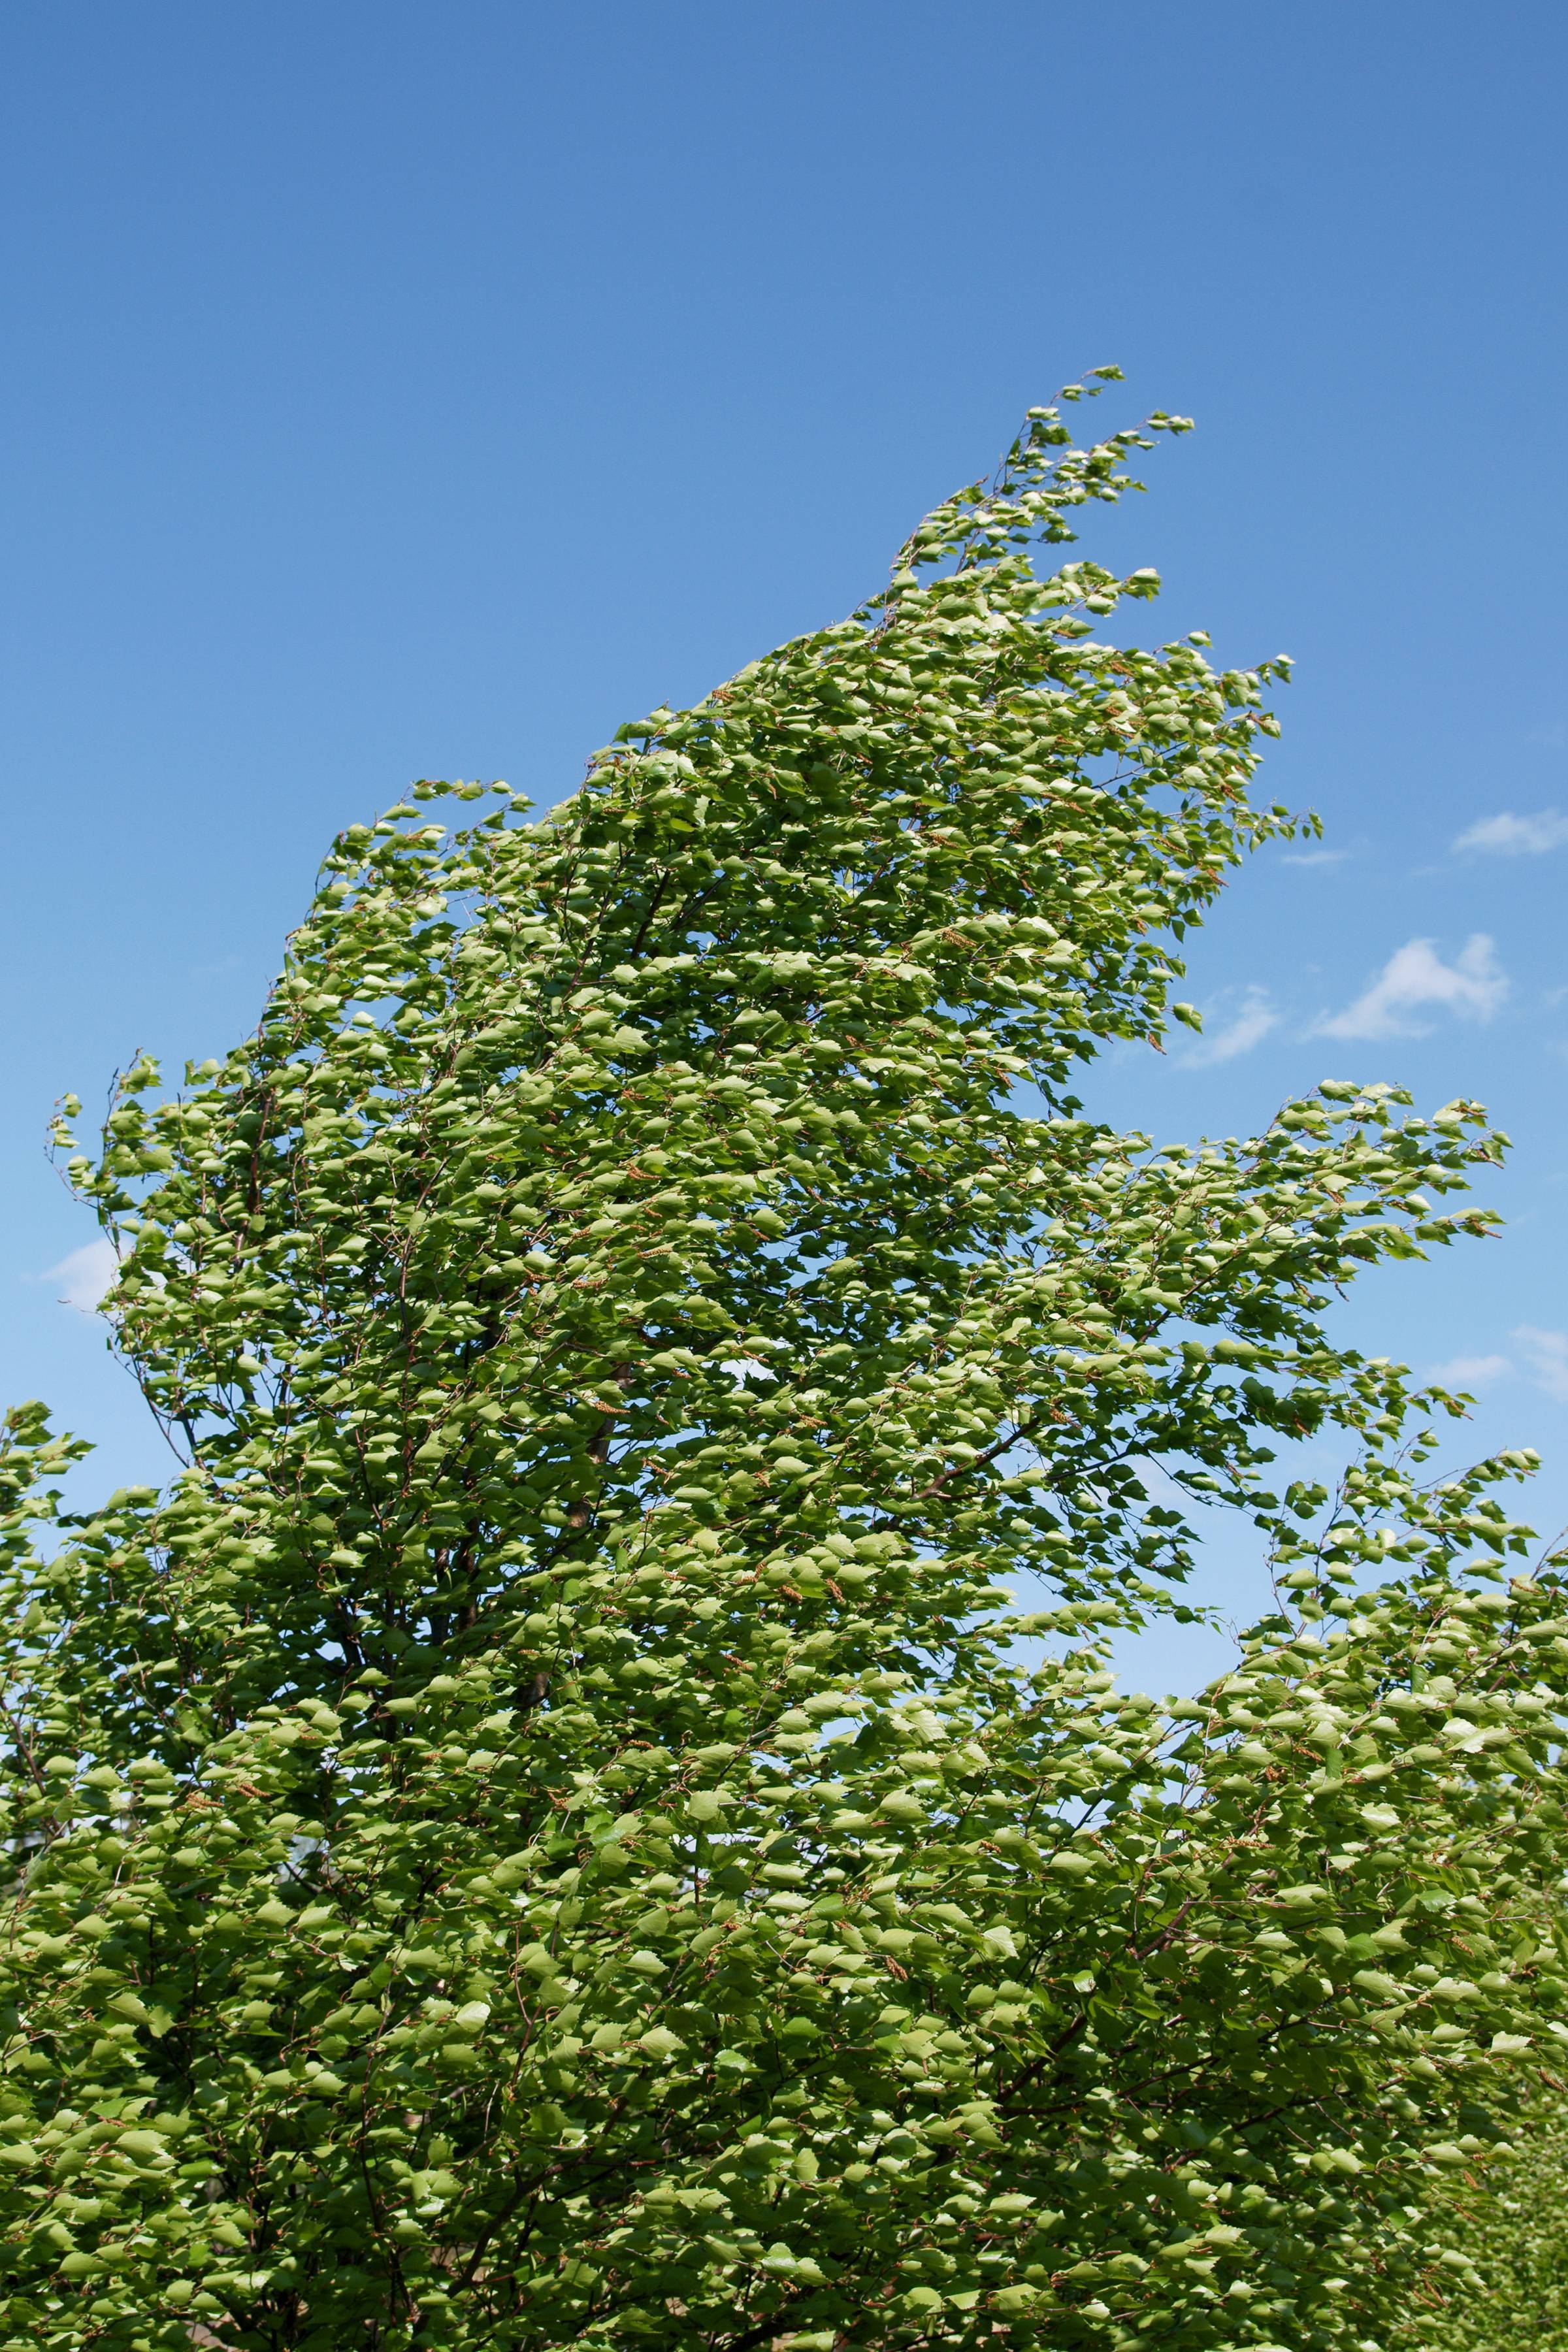 lime-green leaves on dark-brown branches